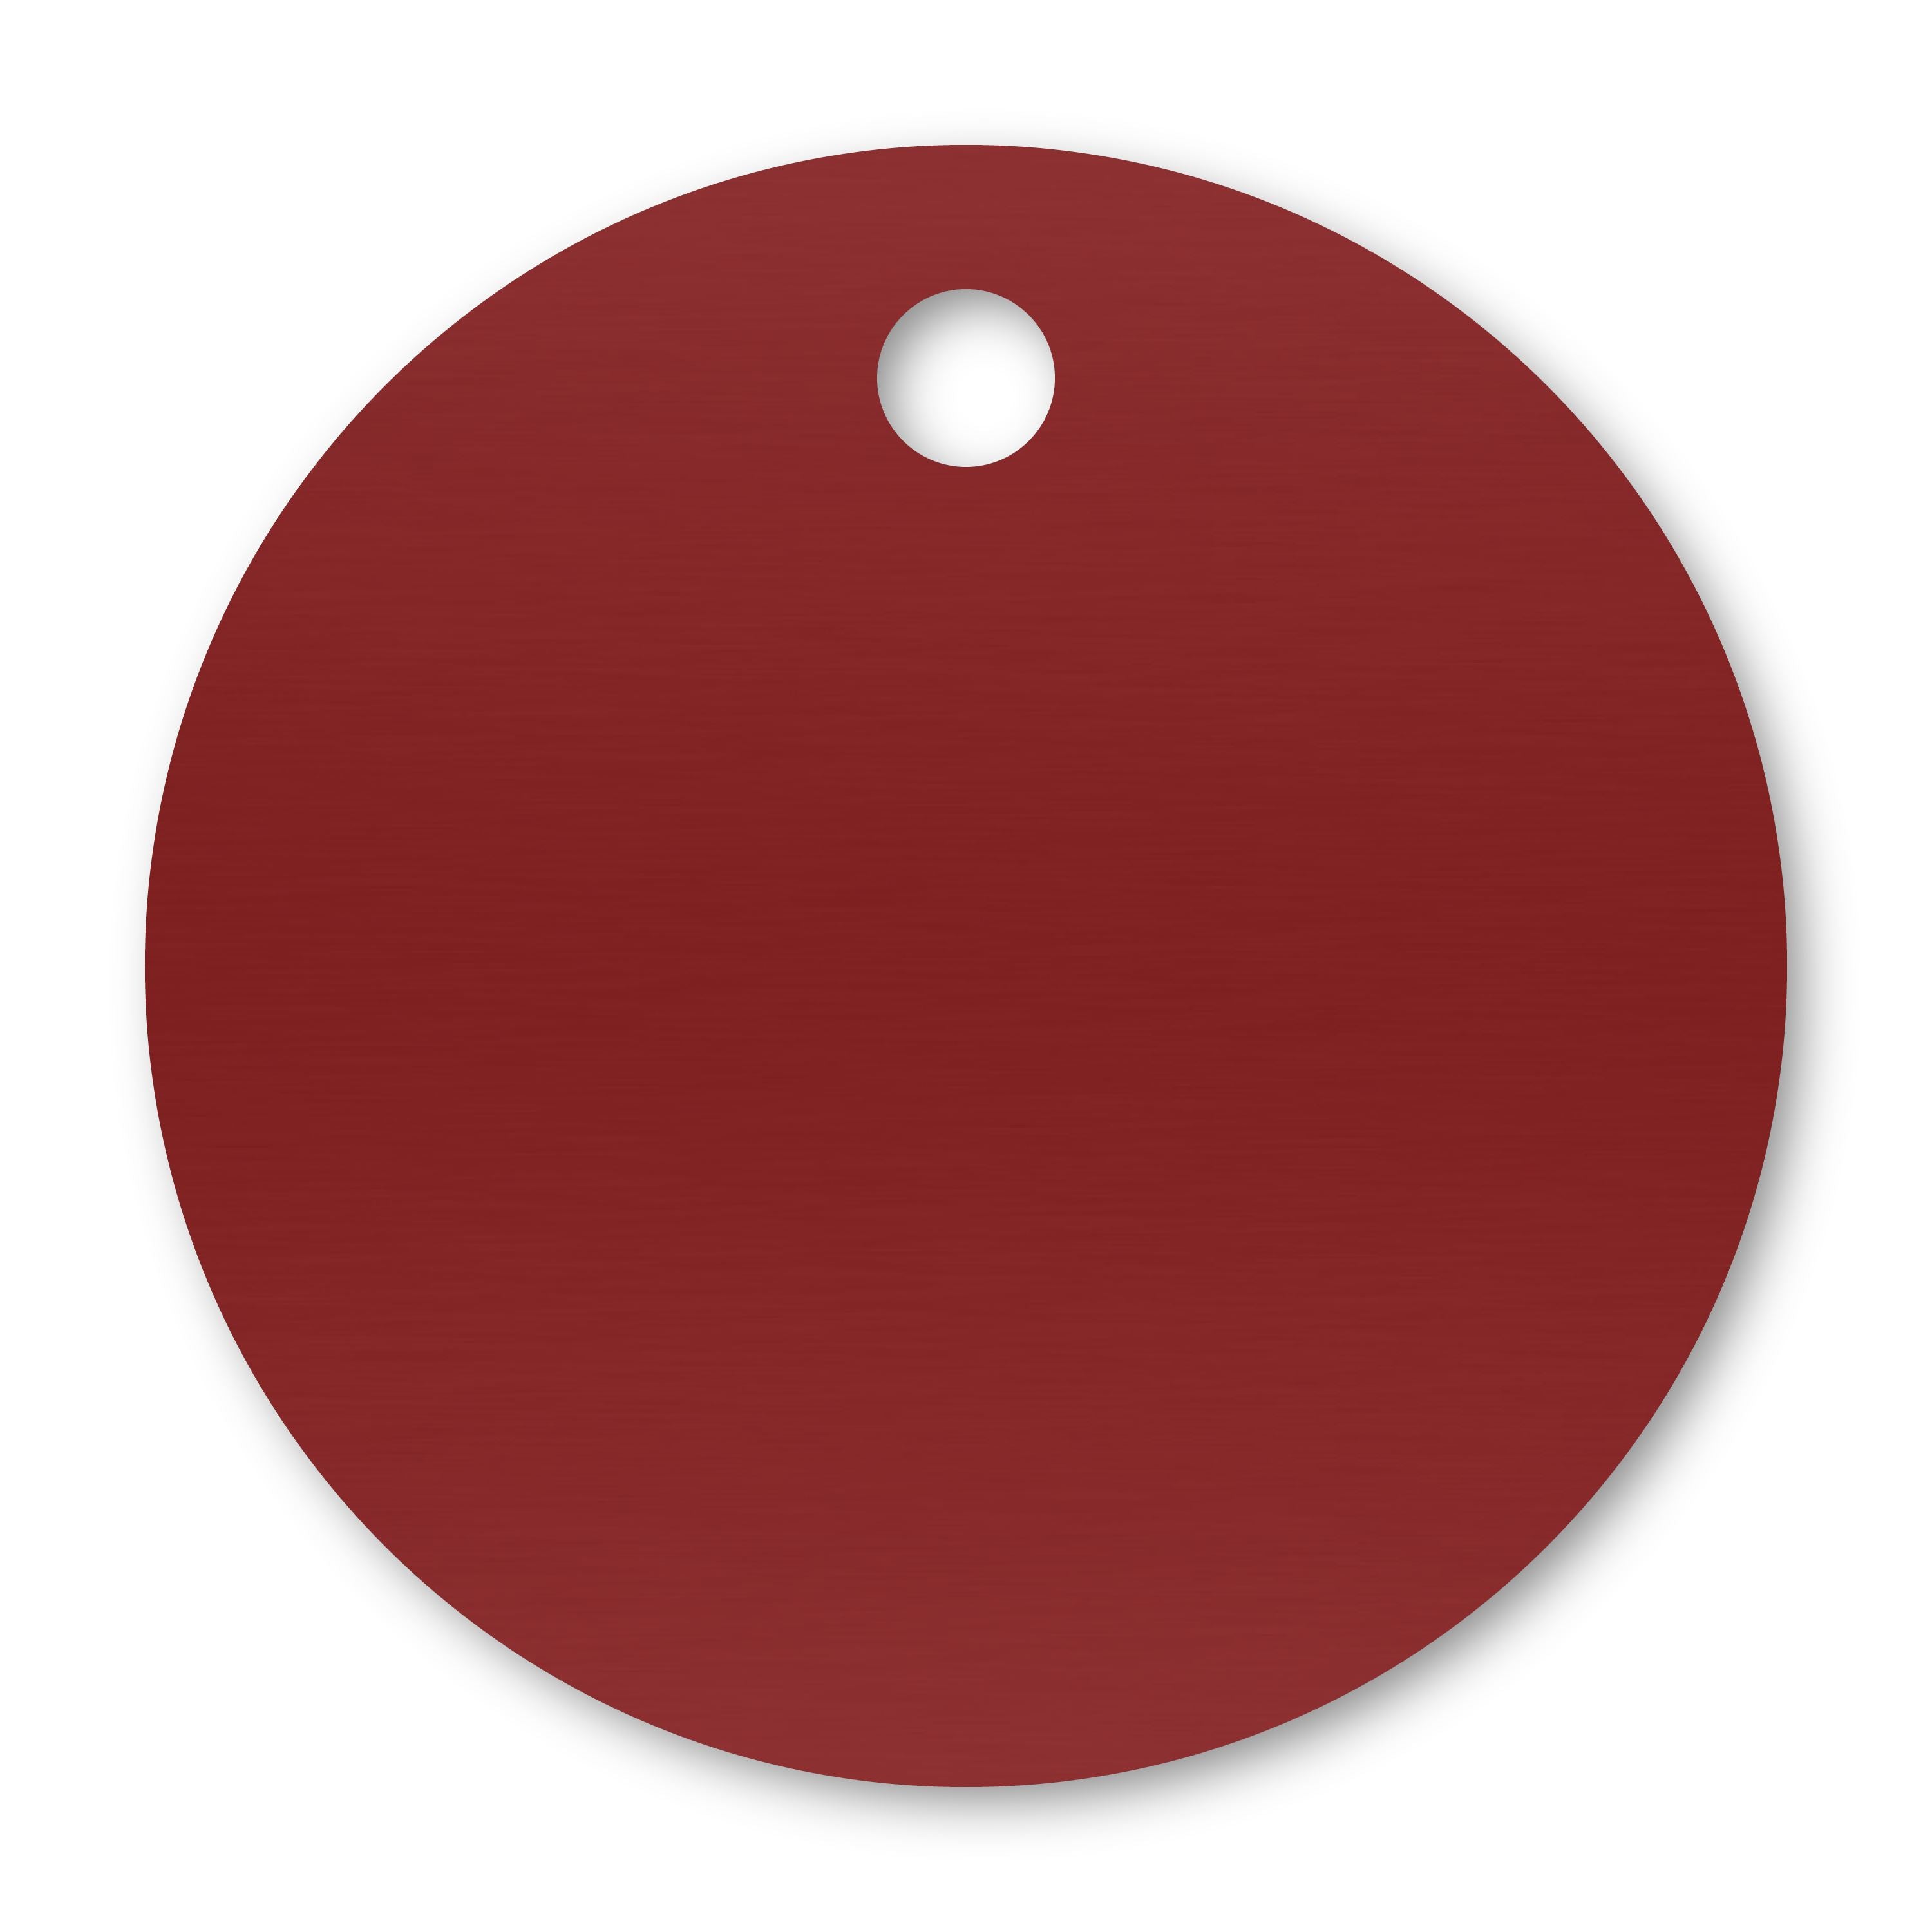 Anodized Aluminum Round Tags, 1-1/2" with 1/8" Hole, Laser Engraved Metal Tags Craftworks NW Red 